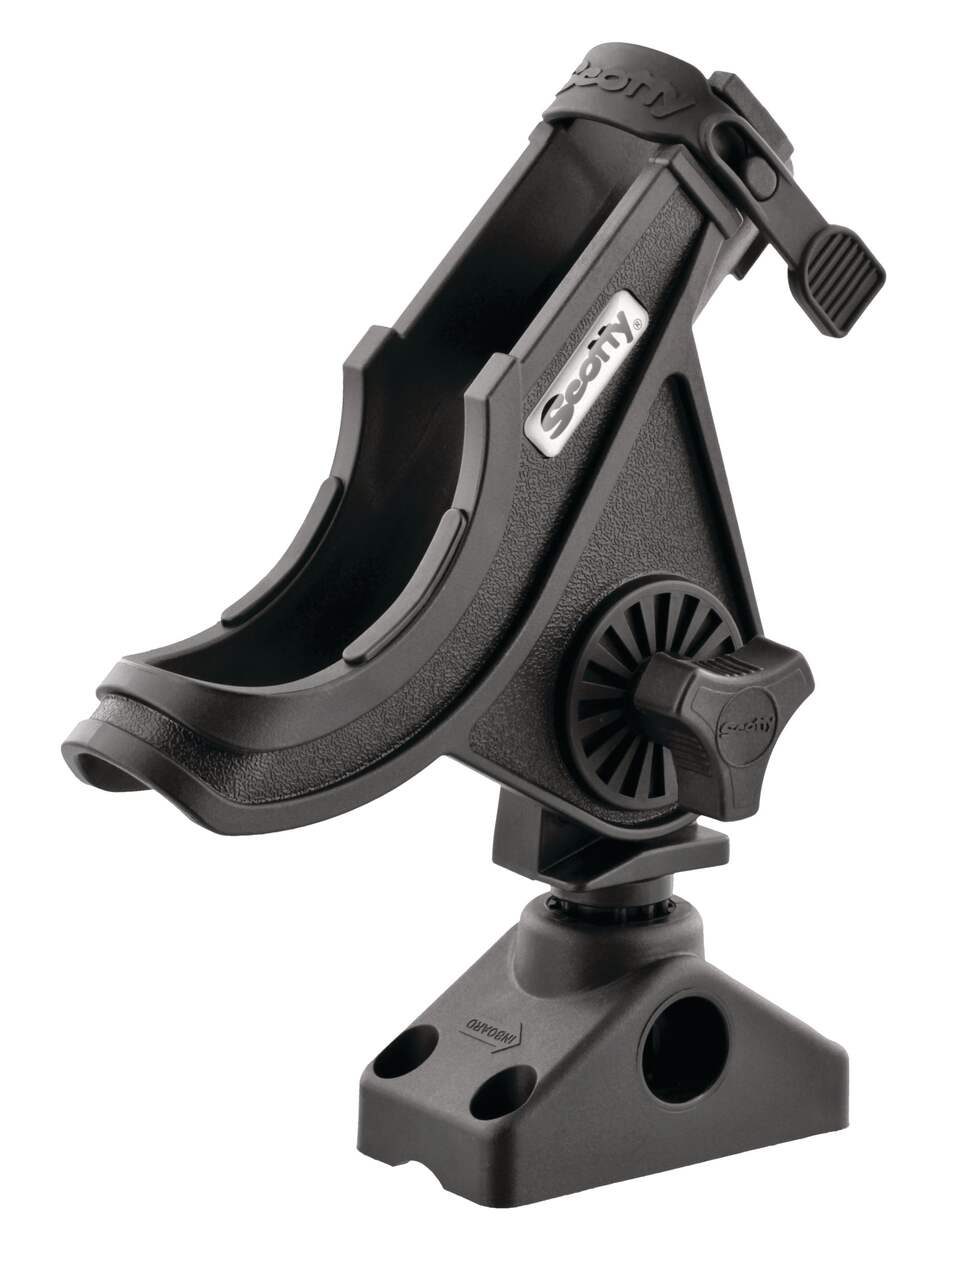 https://media-www.canadiantire.ca/product/playing/fishing/fishing-equipment/0789560/scotty-bait-caster-rod-holder-26fd4ba2-0a9b-43c9-800d-74a33af0c409-jpgrendition.jpg?imdensity=1&imwidth=1244&impolicy=mZoom